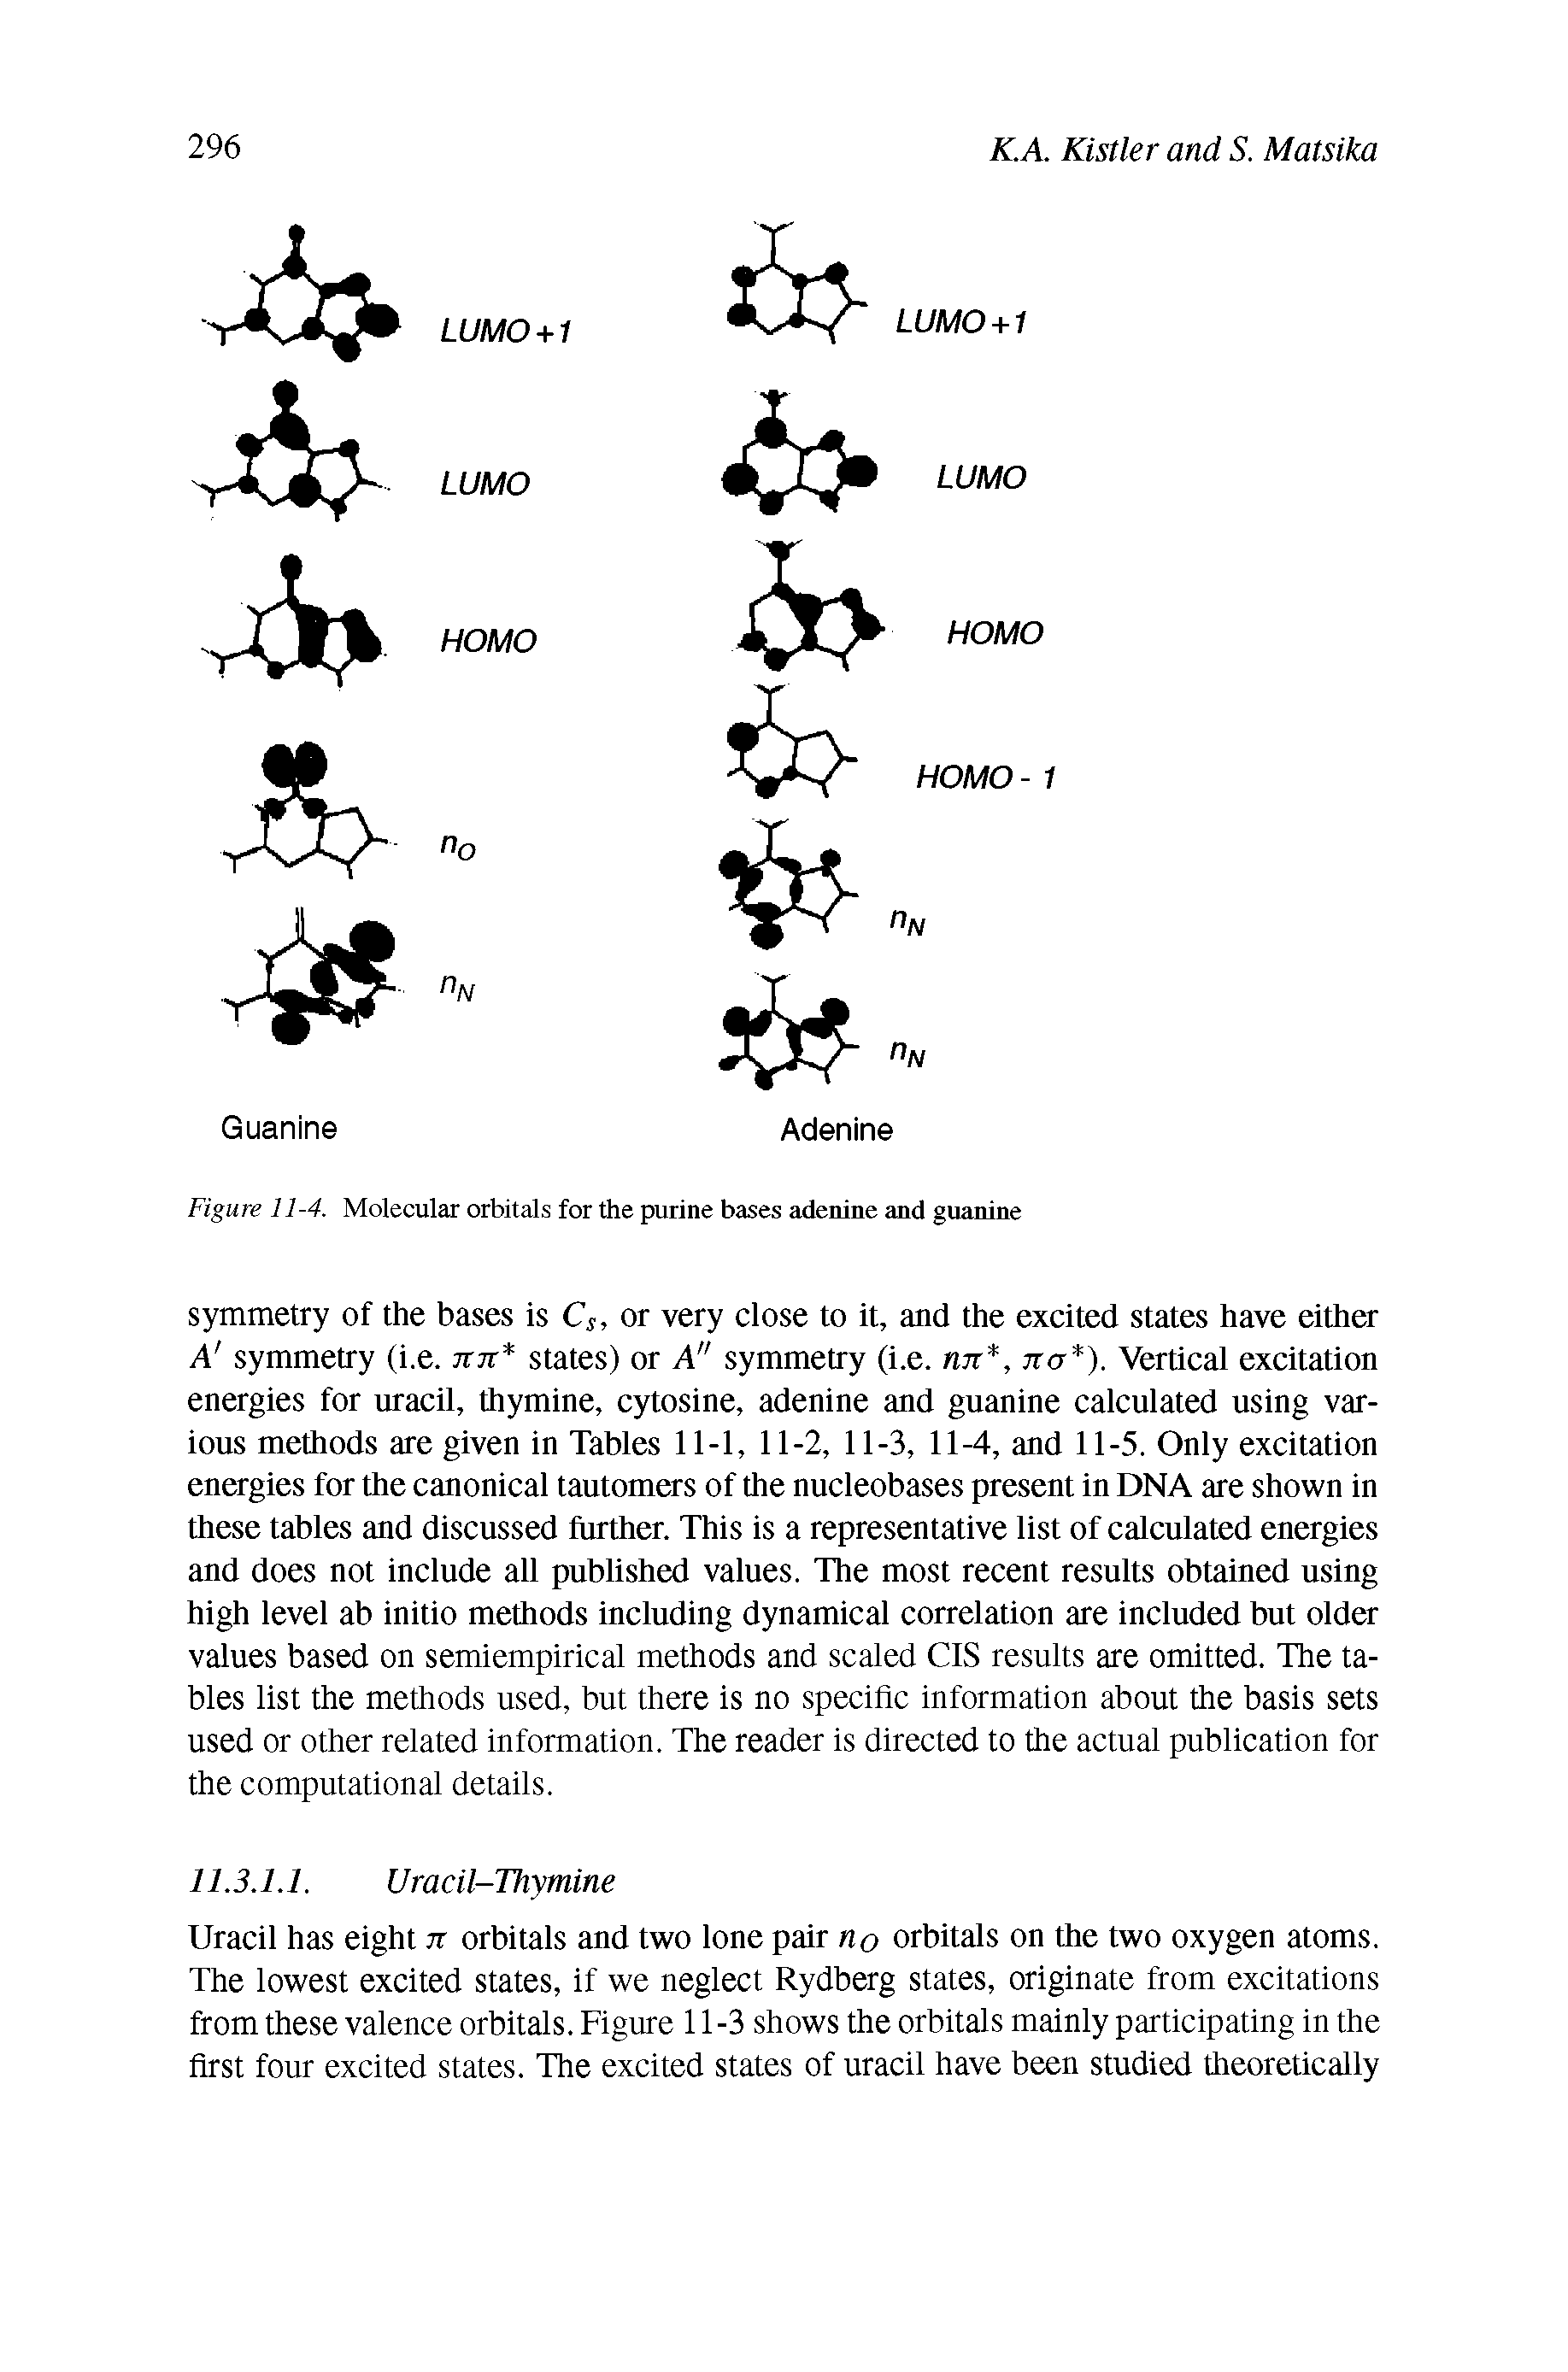 Figure 11-4. Molecular orbitals for the purine bases adenine and guanine...